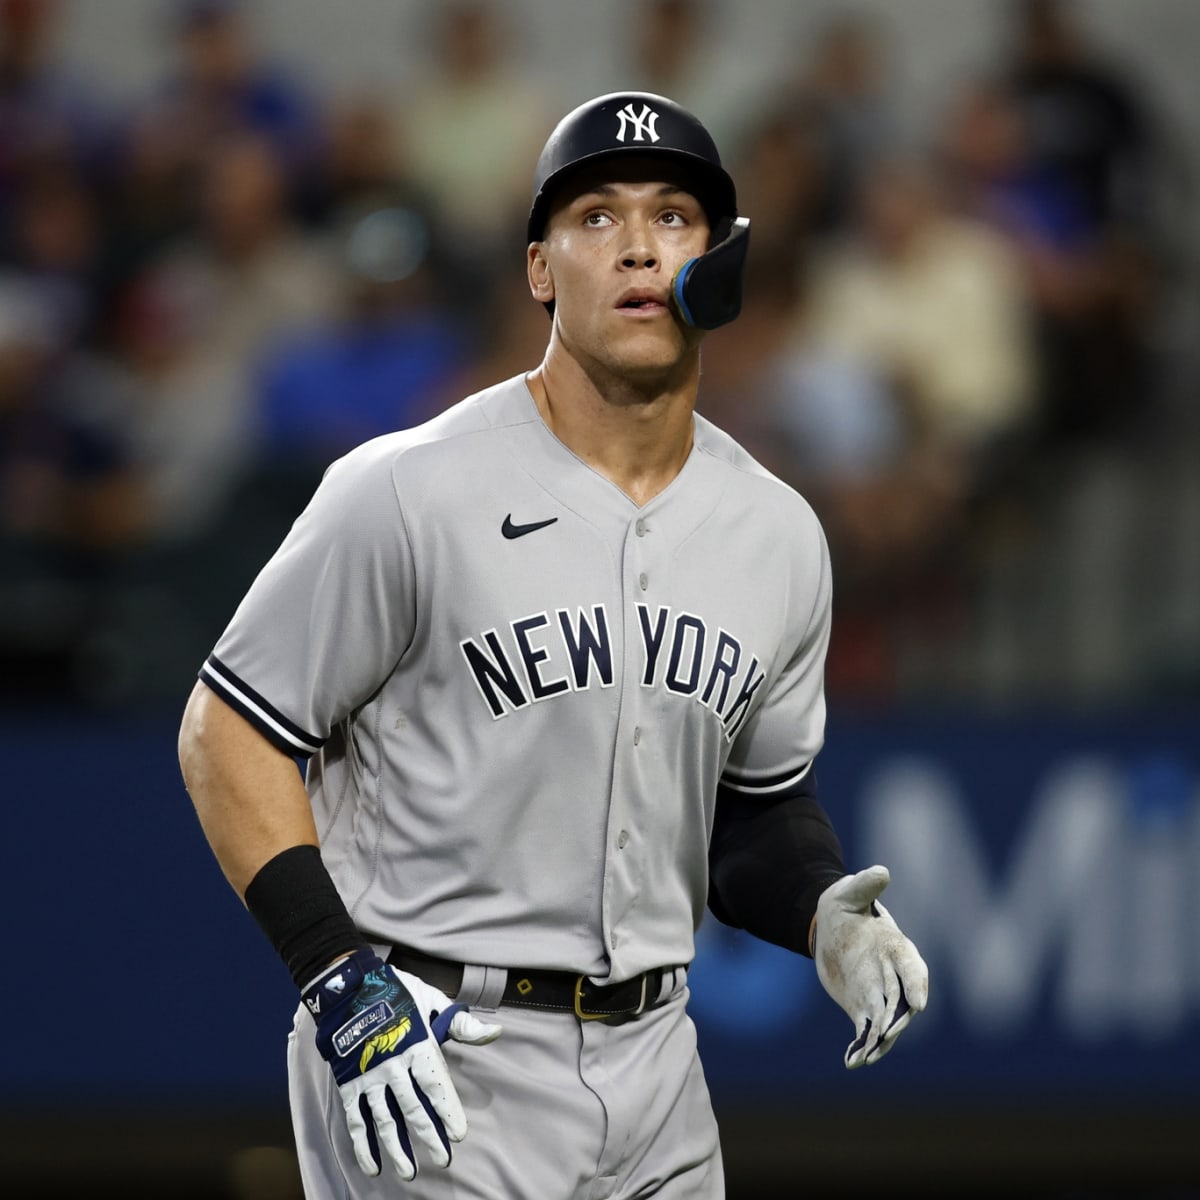 The Yankees are entering dangerous territory with Aaron Judge